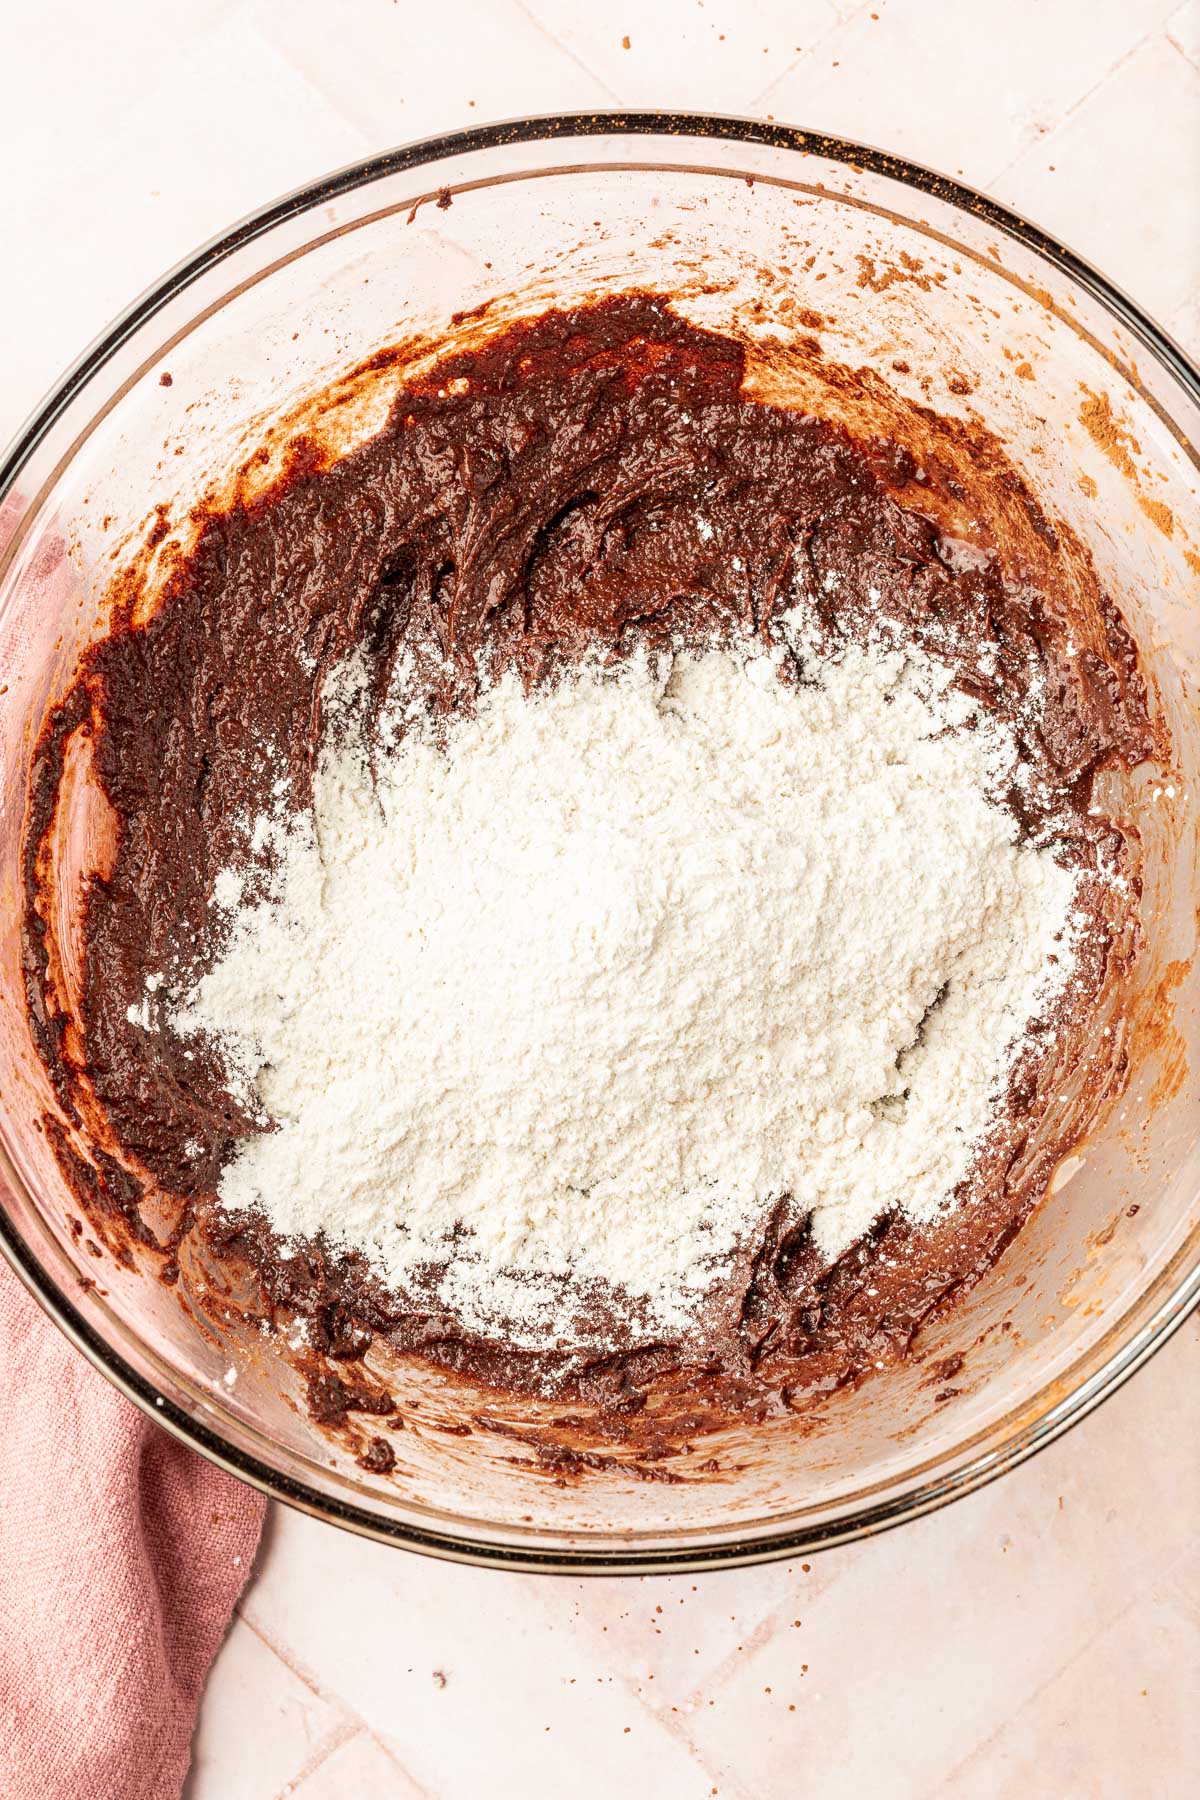 A glass mixing bowl with brownie batter topped with a pile of gluten-free flour before mixing together.